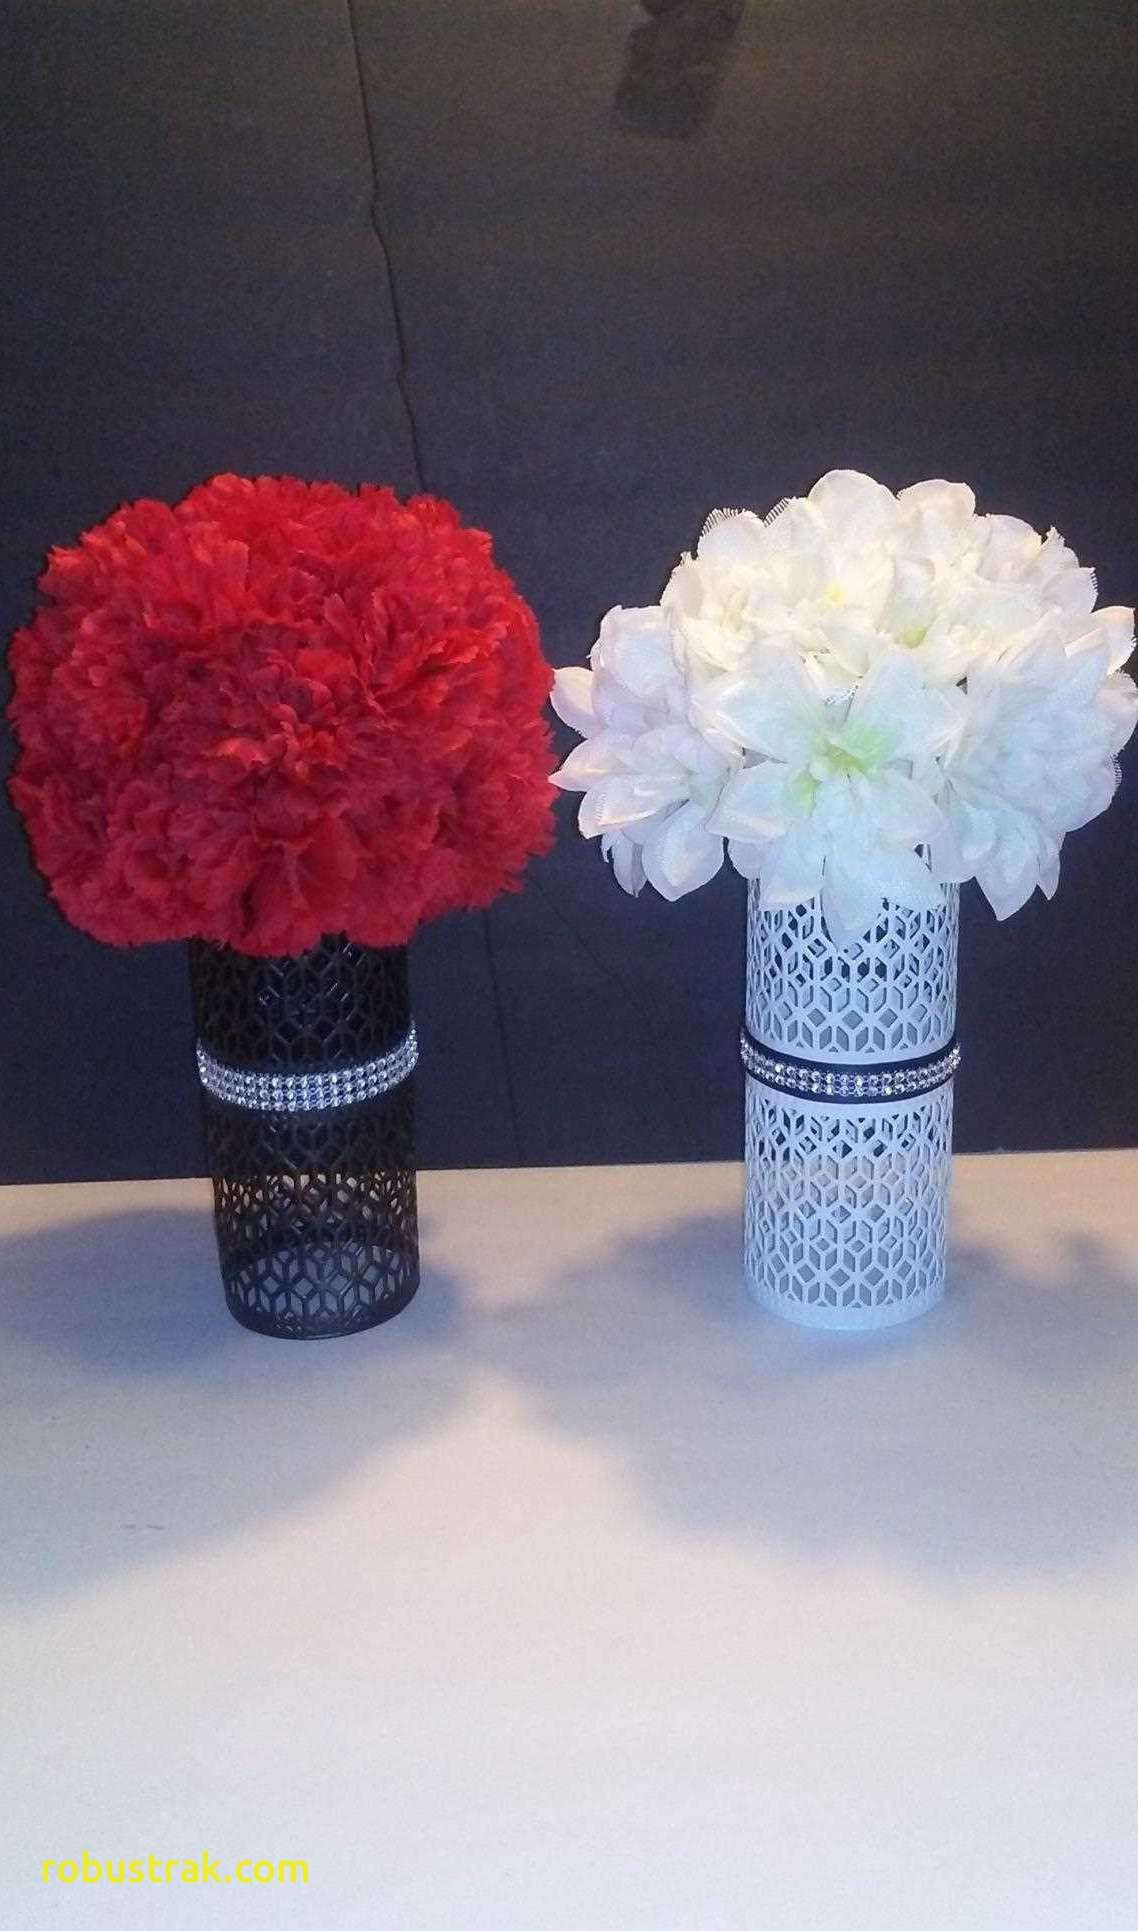 pier one tall vases of picture frame vase fresh floral wedding decoration ideas unique regarding picture frame vase fresh floral wedding decoration ideas unique dollar tree wedding